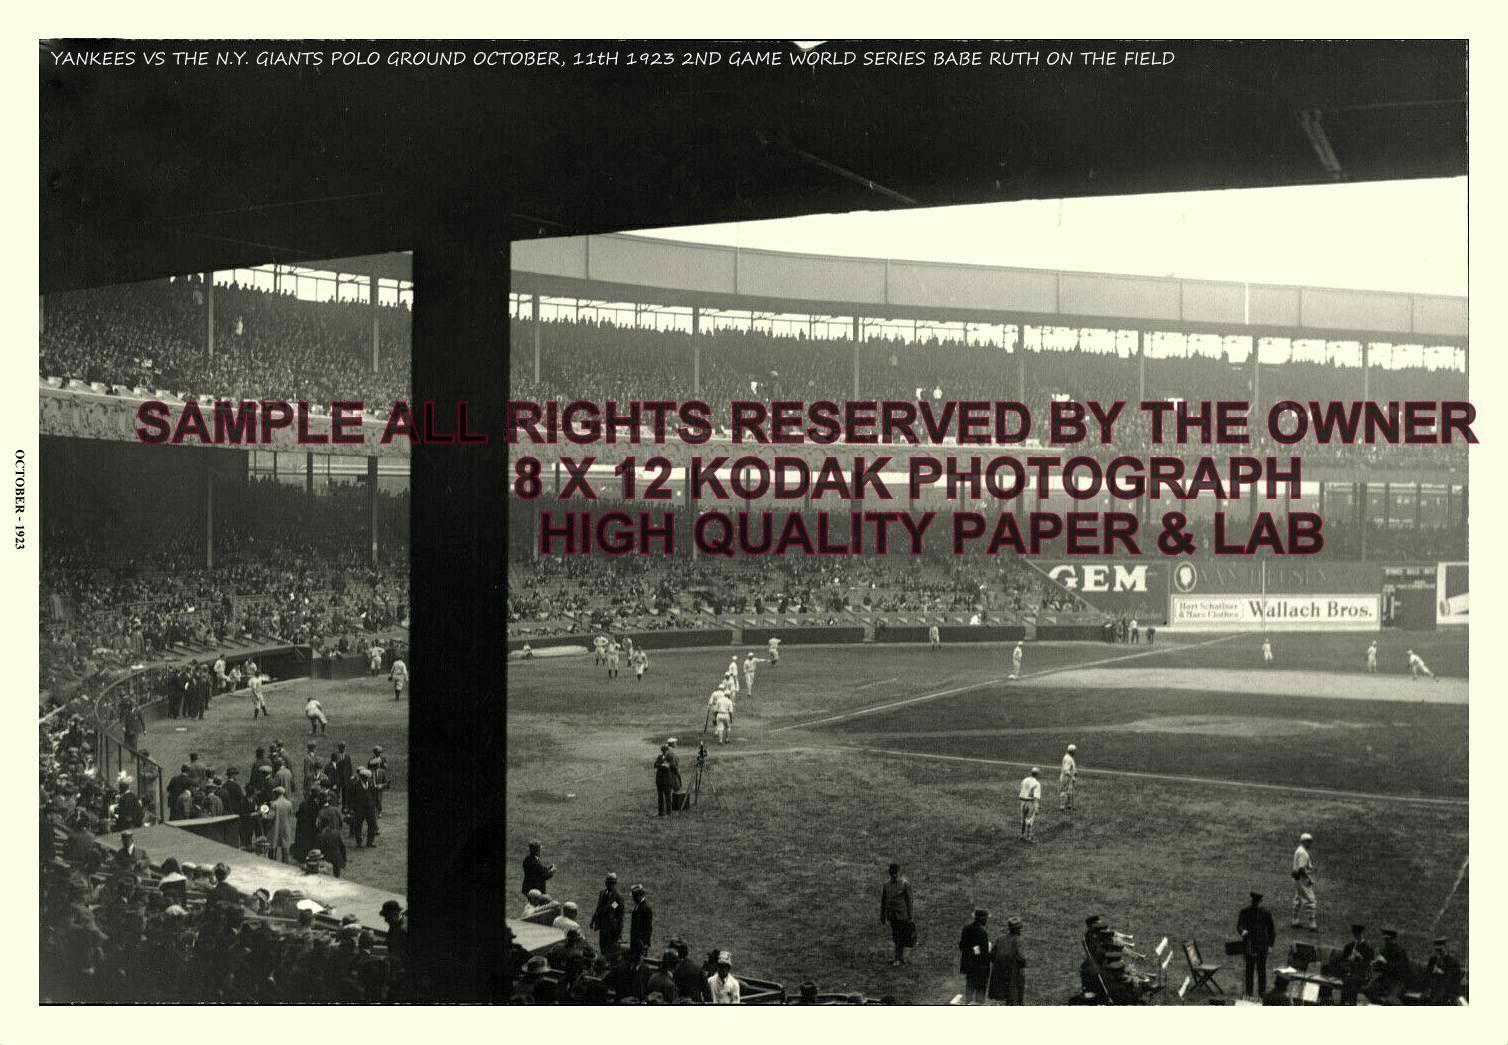 N.y Yankees Vs N.y. Giants @ The Polo Grounds 8x12 Photo Babe Ruth 1923 W.series